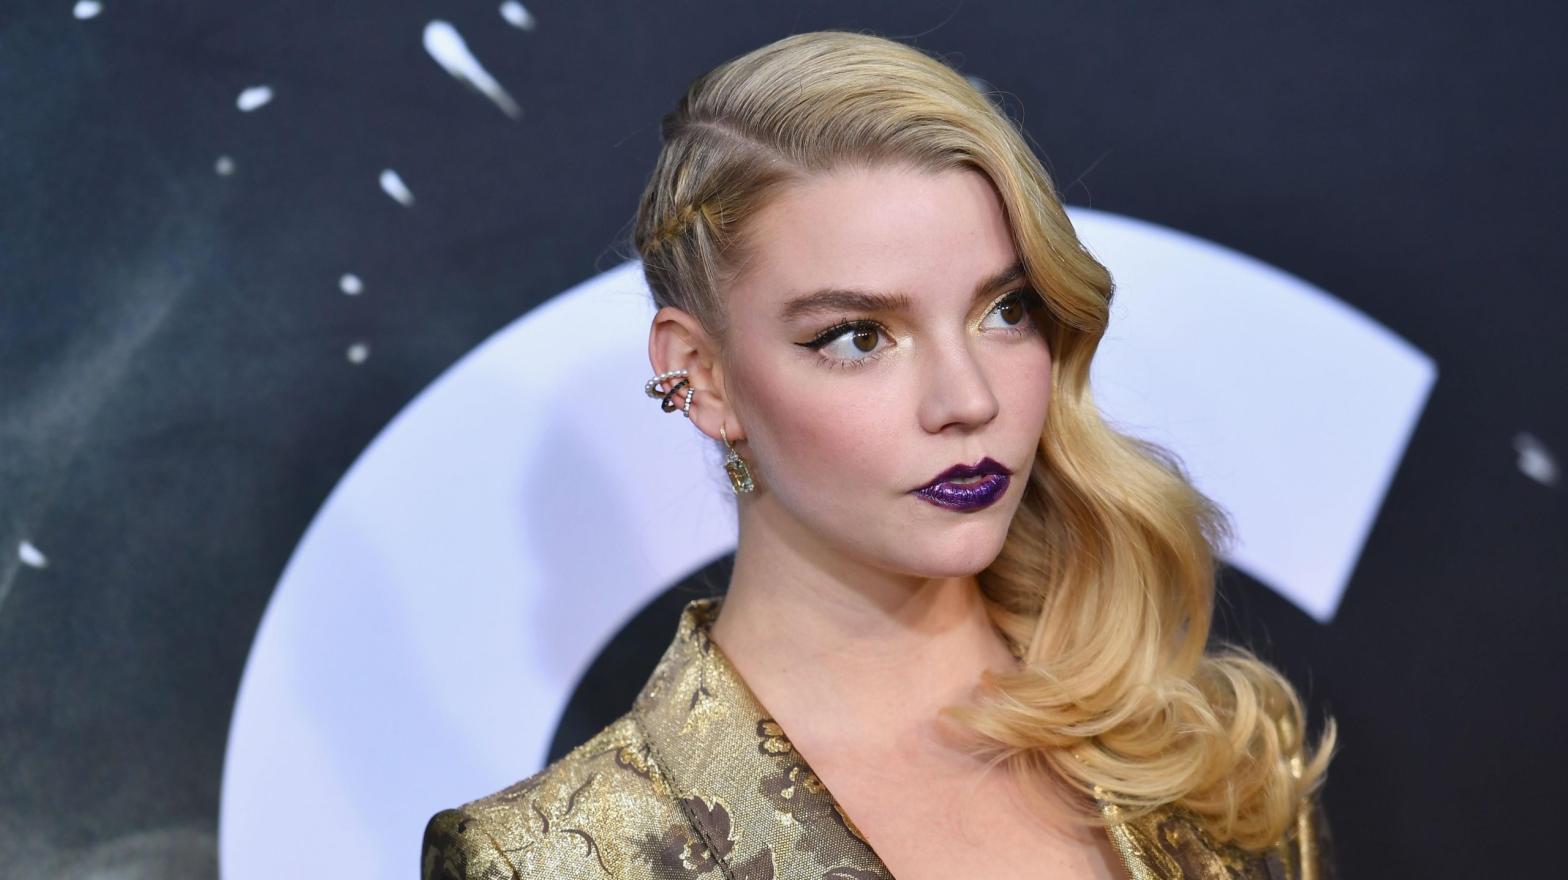 Anya Taylor-Joy at the premiere of Glass at SVA Theatre on January 15, 2019, in New York City. (Image: Angela Weiss/AFP, Getty Images)